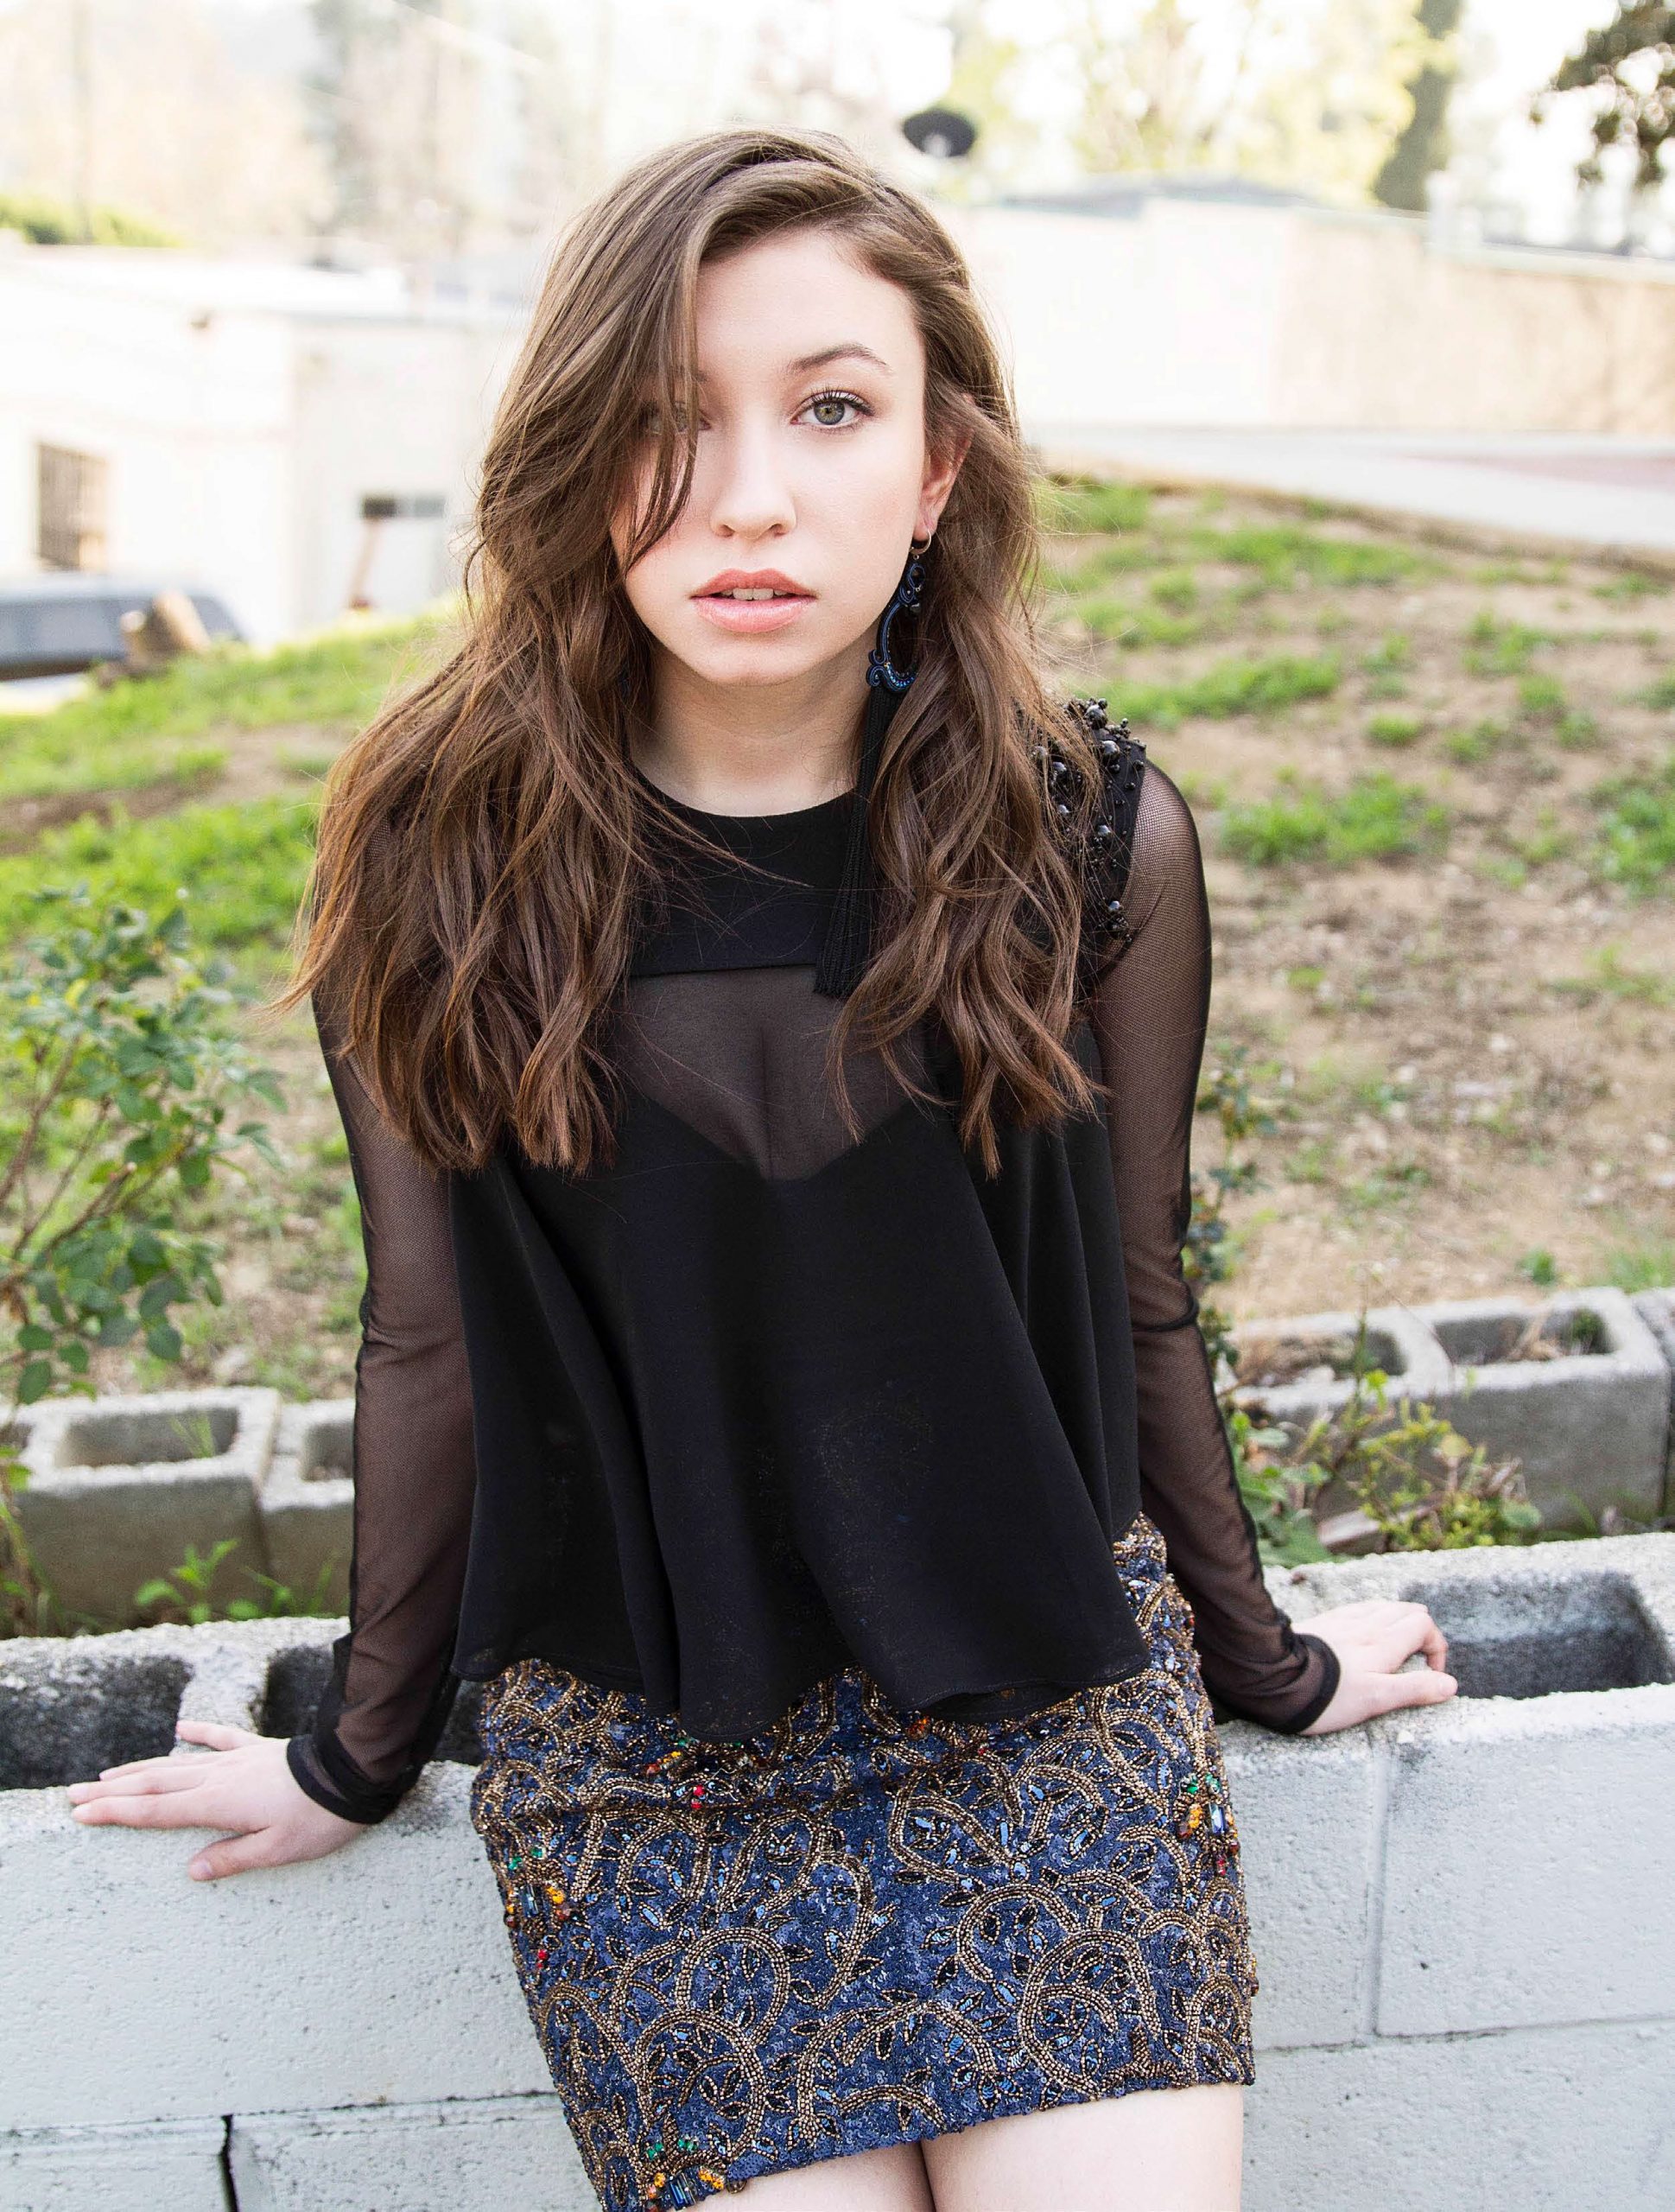 50 Katelyn Nacon Nude Pictures Which Prove Beauty Beyond Recognition 11